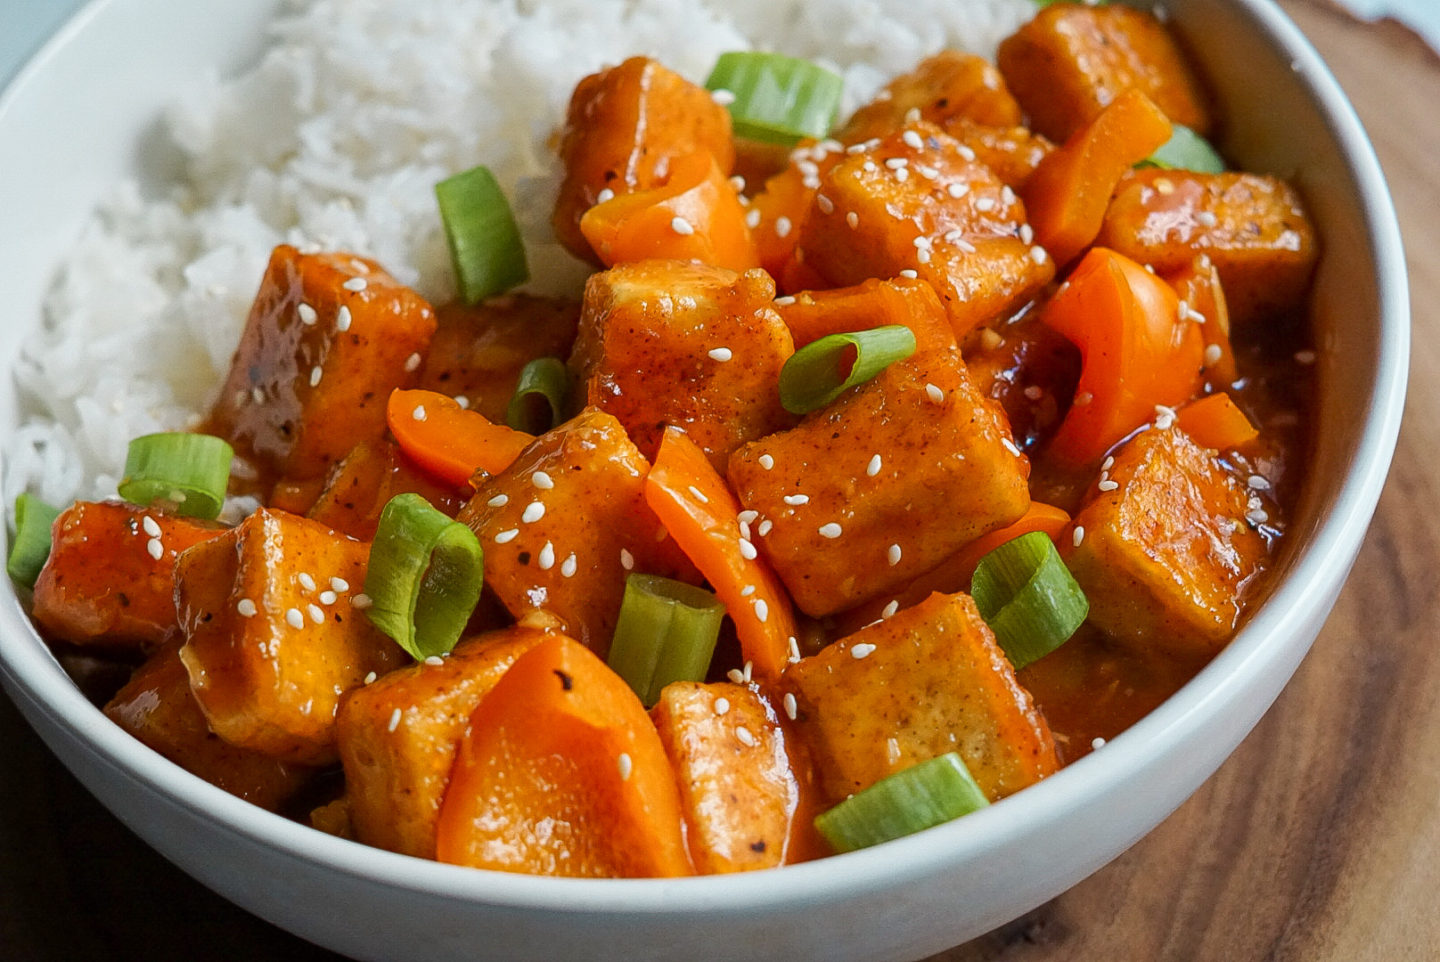 spicy vegan orange chicken recipe with tofu and peppers